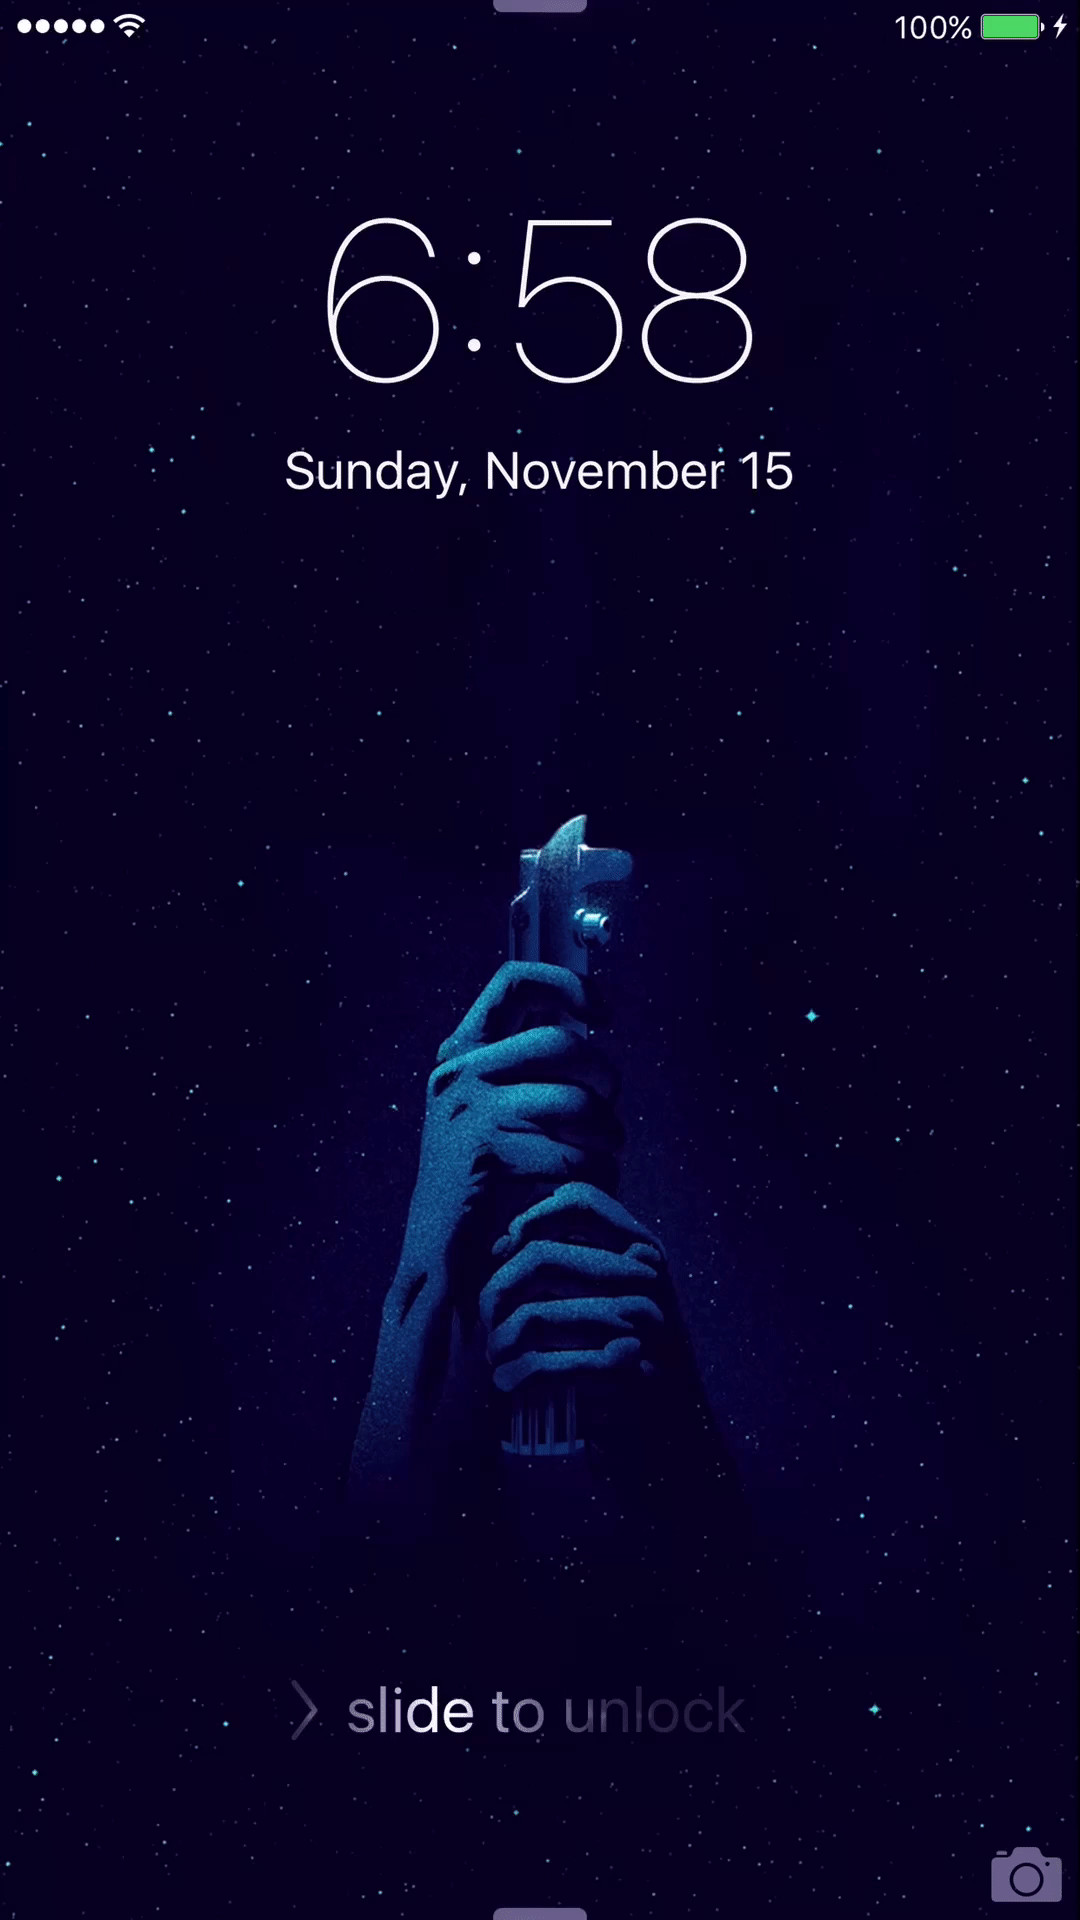 1080x1920 CWHCWH Star Wars Images, NMgnCP PC Gallery